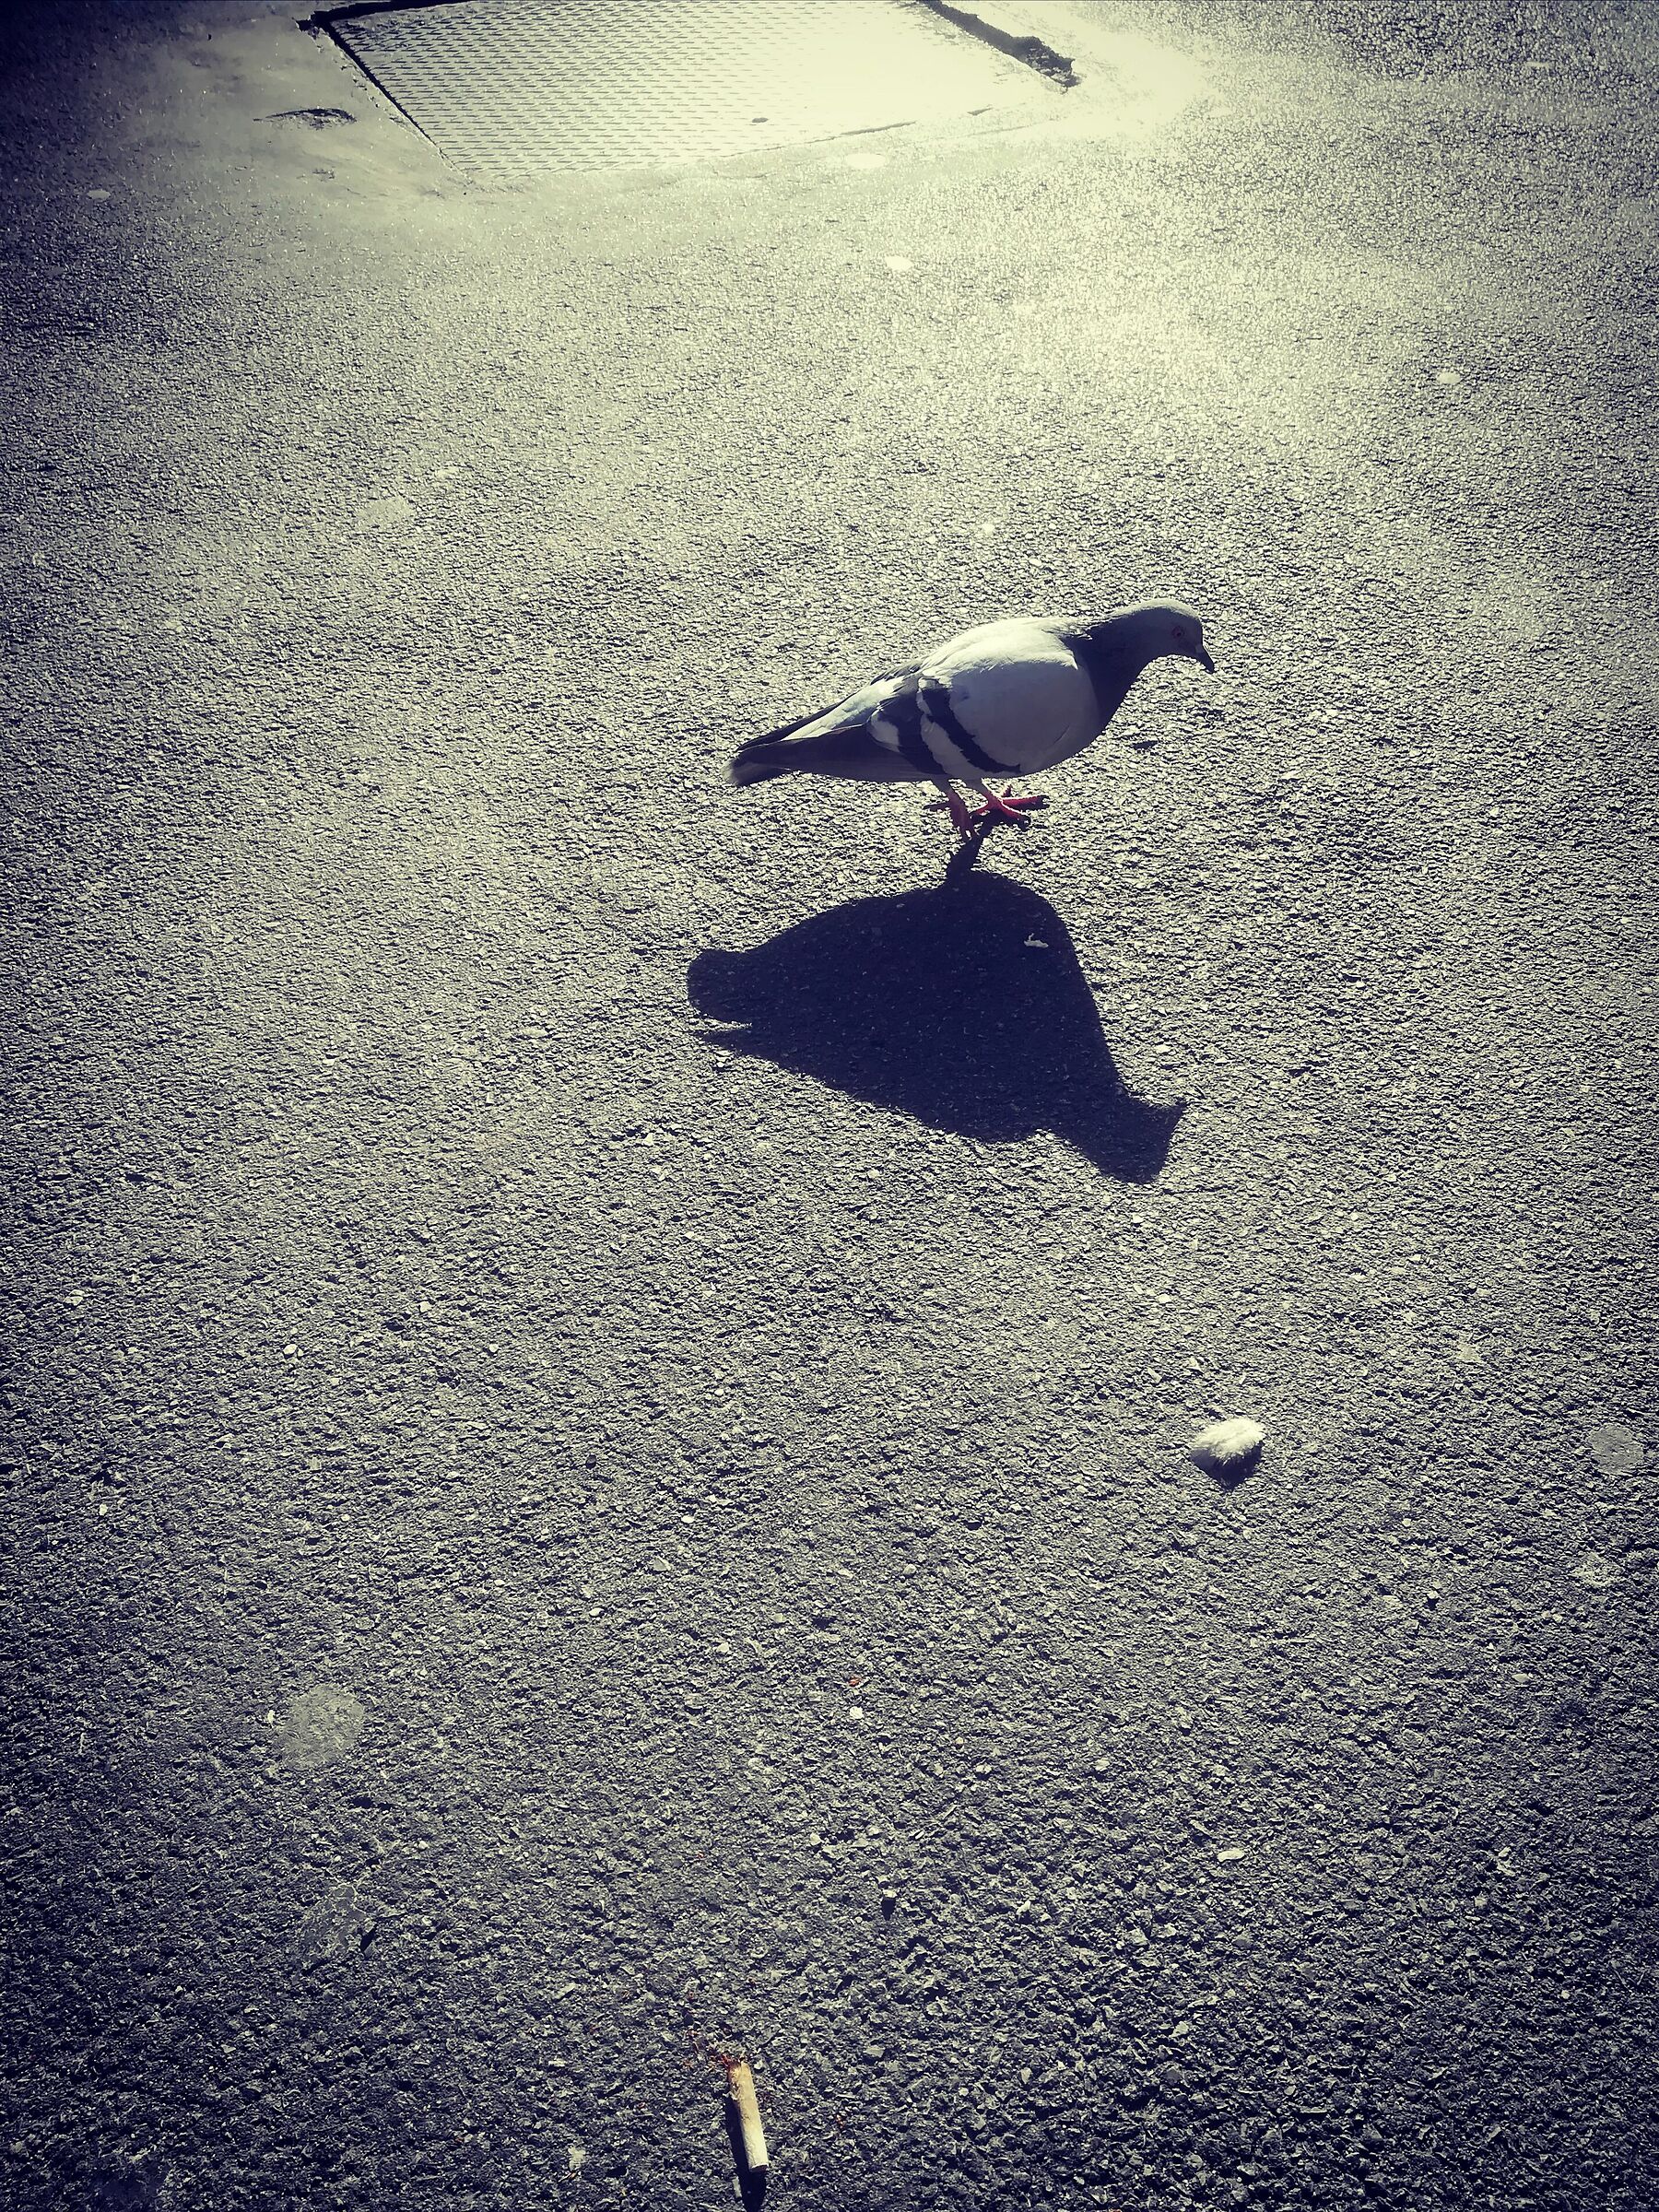 The Solitary Pigeon...